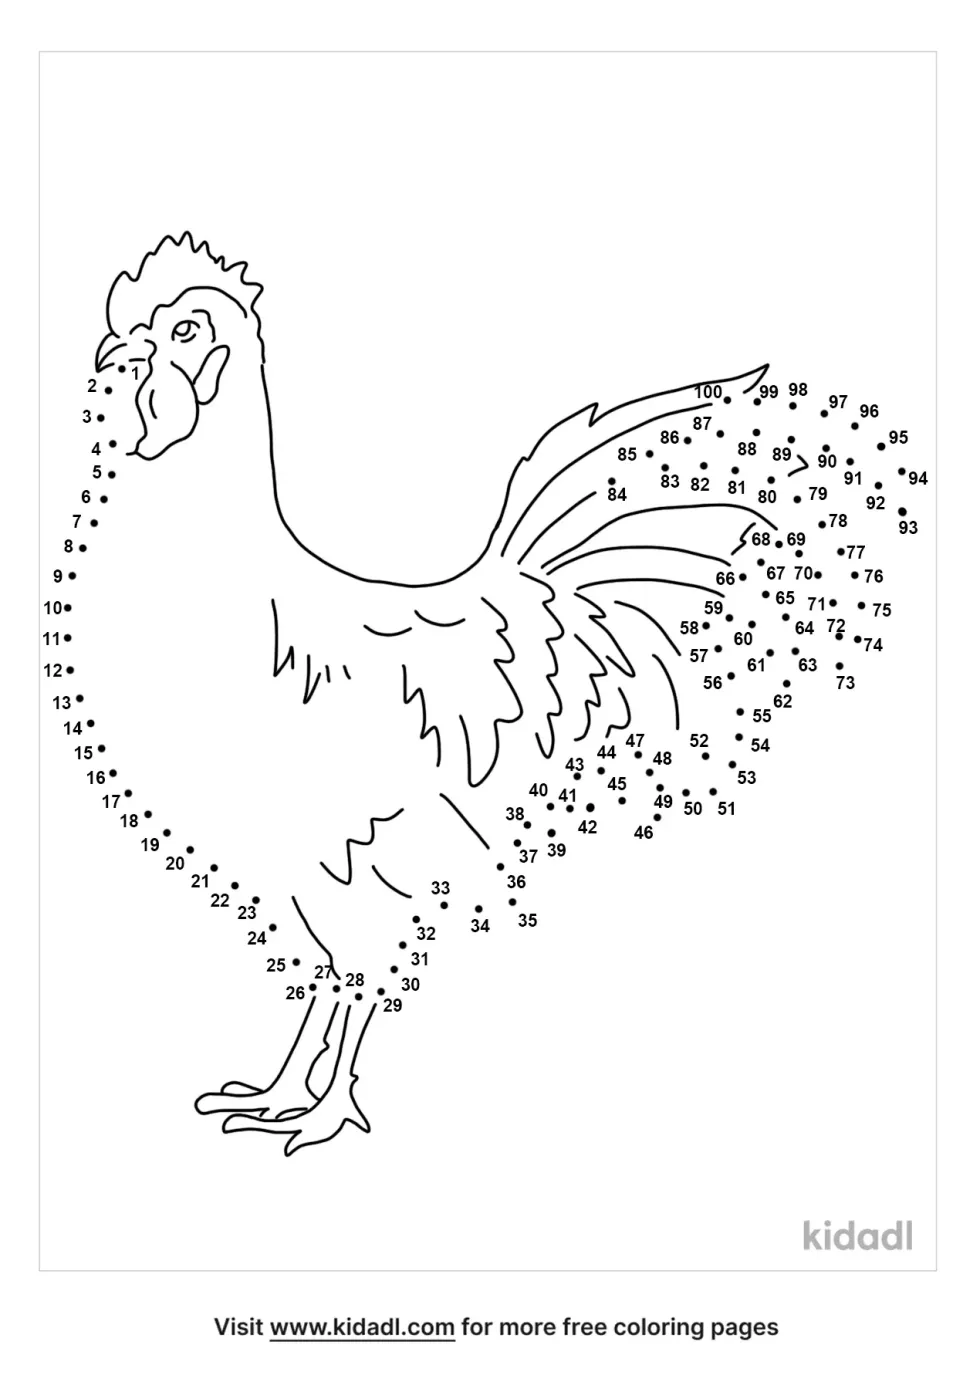 The French Rooster